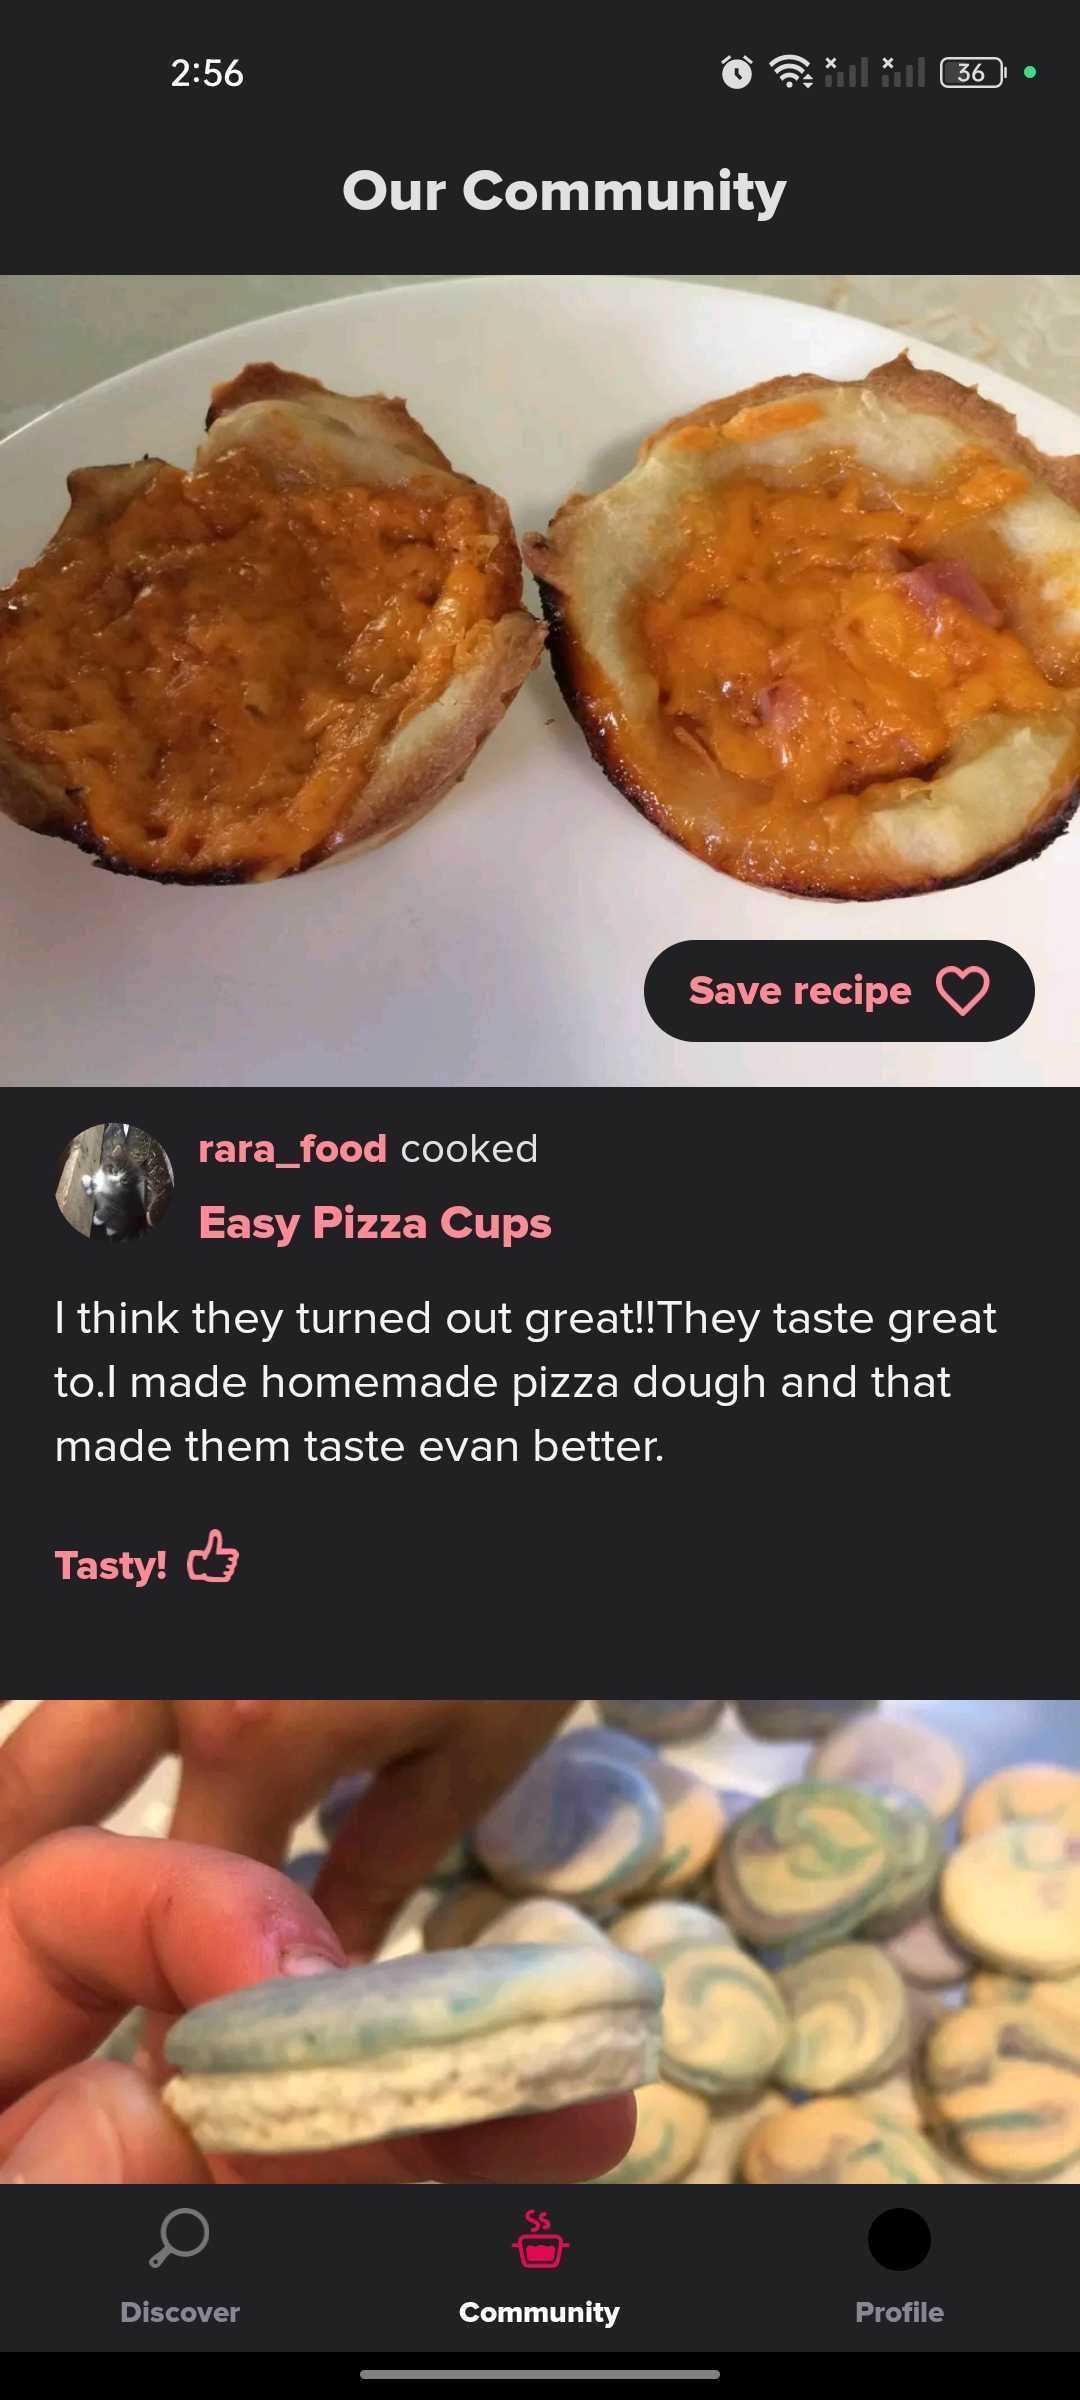 Community section in the Tasty app